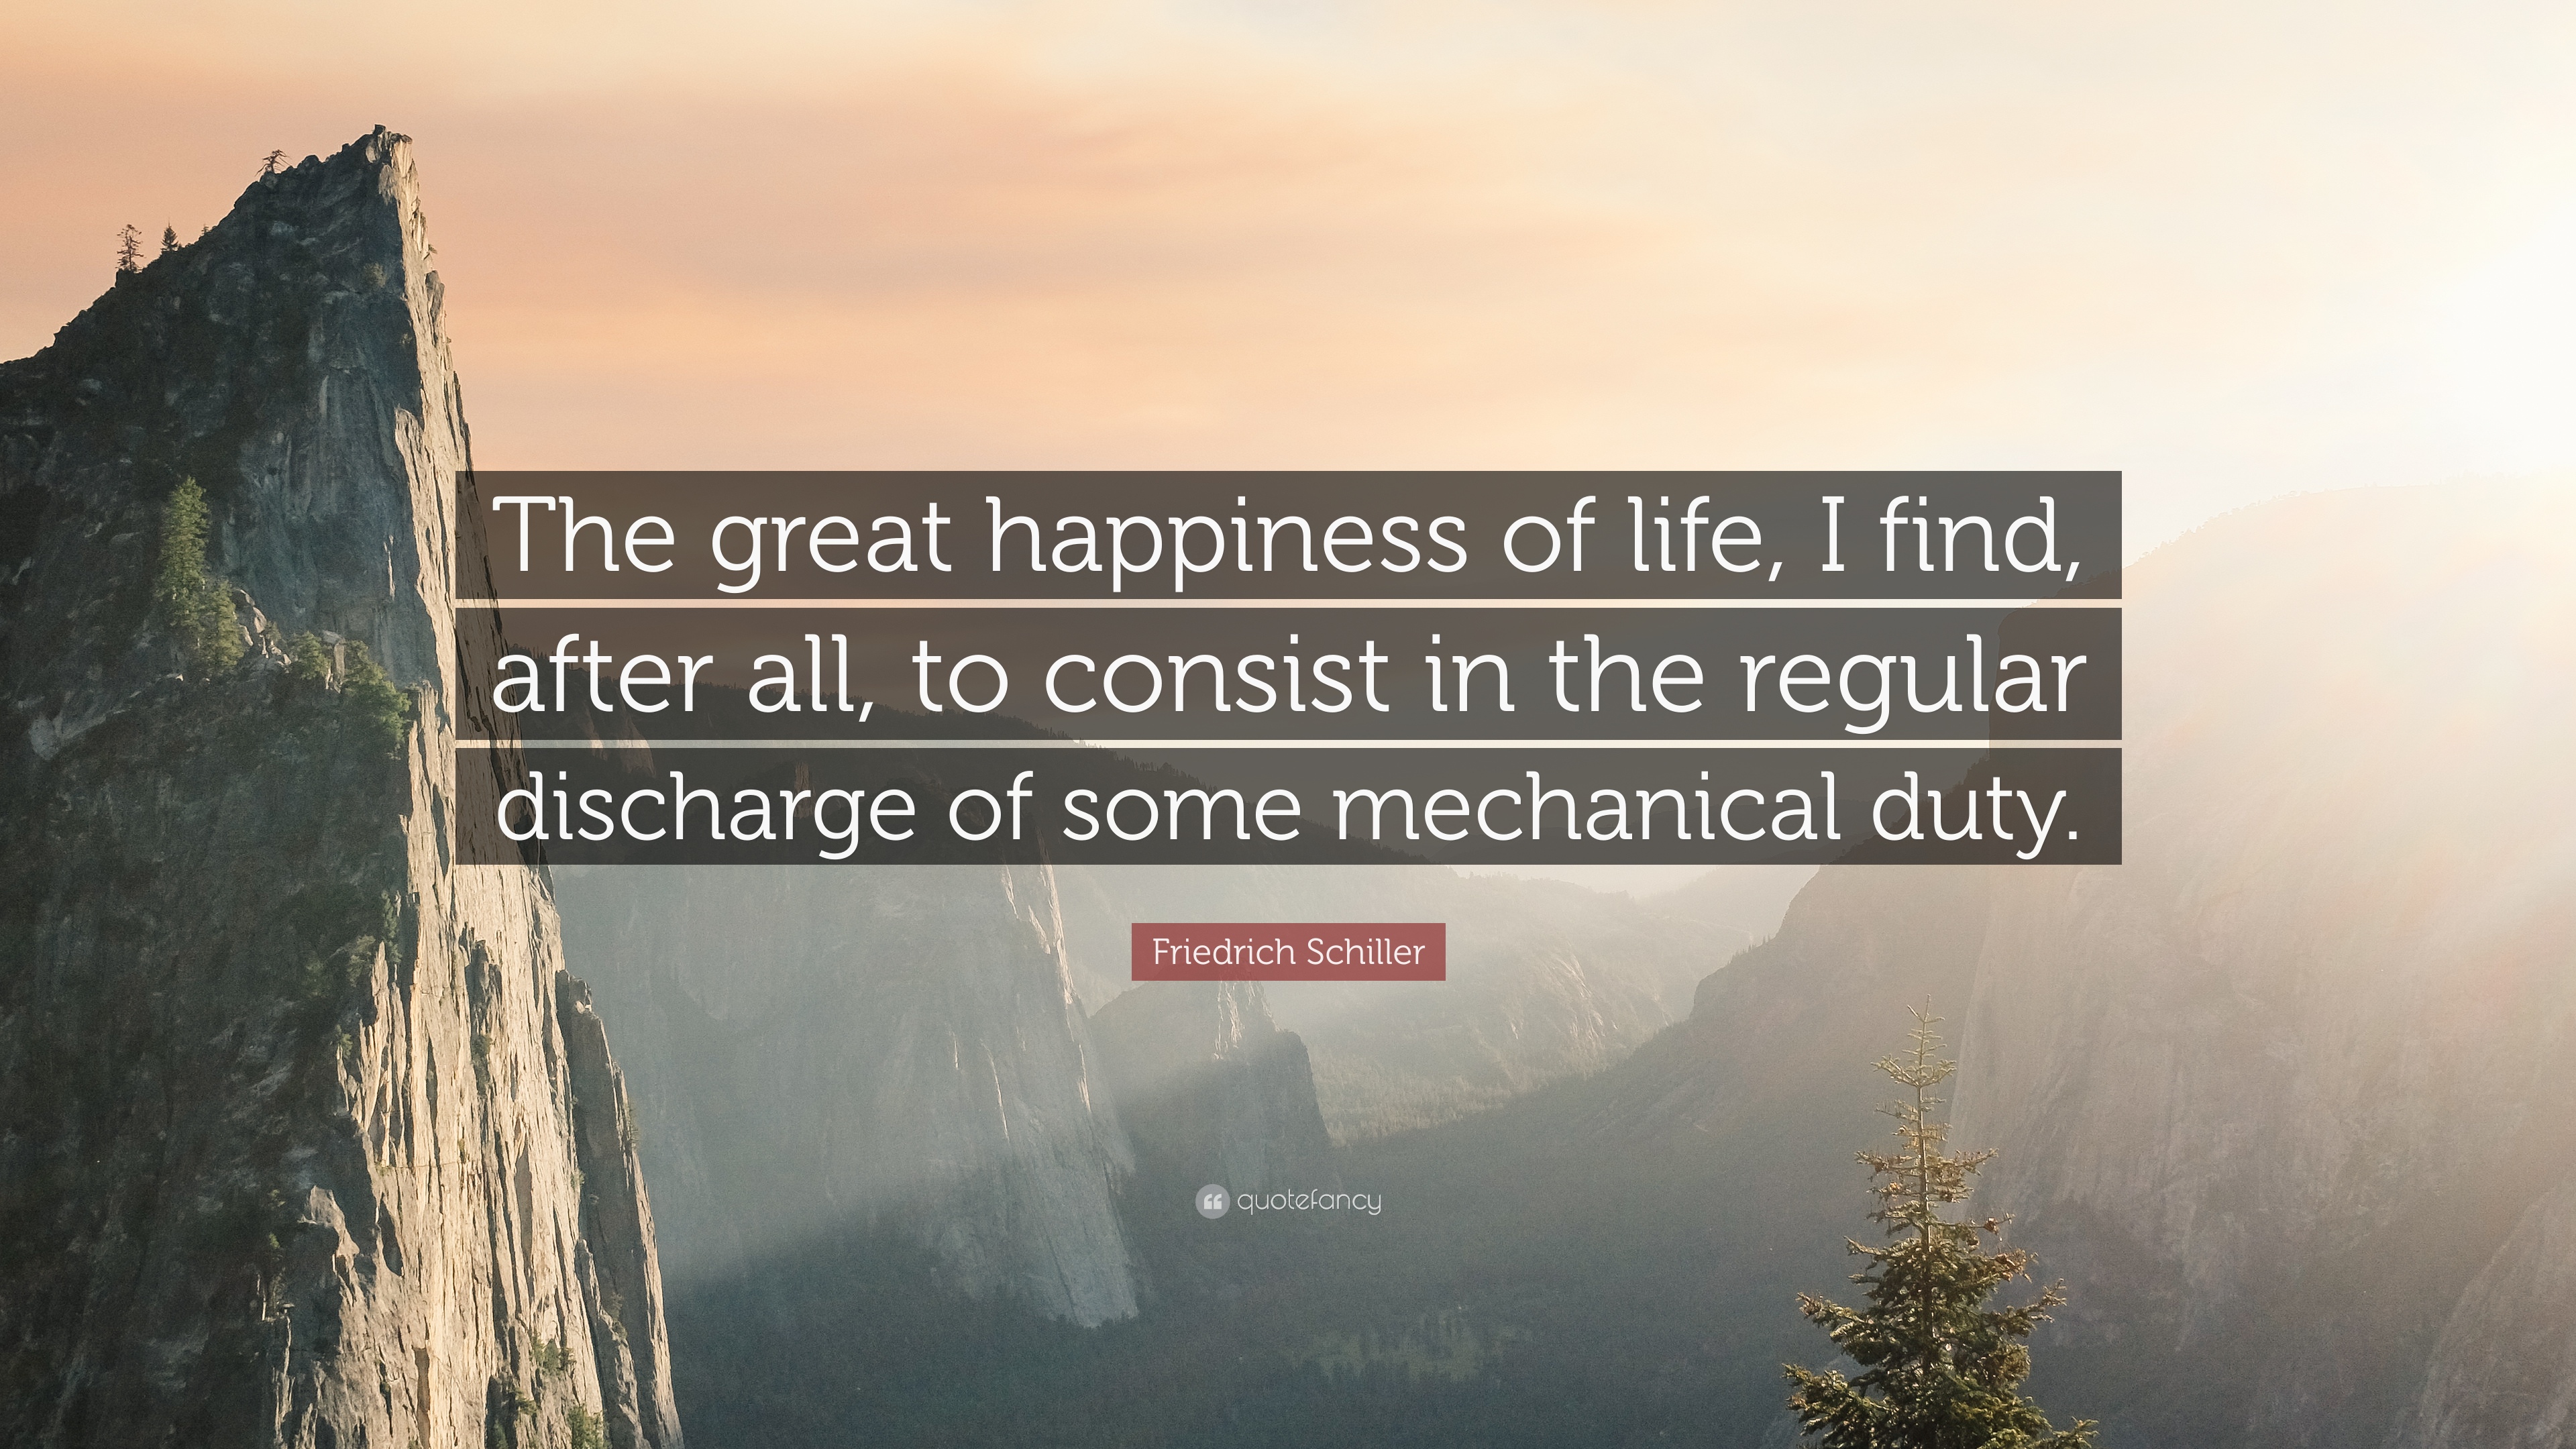 Friedrich Schiller Quote: “The great happiness of life, I find ...